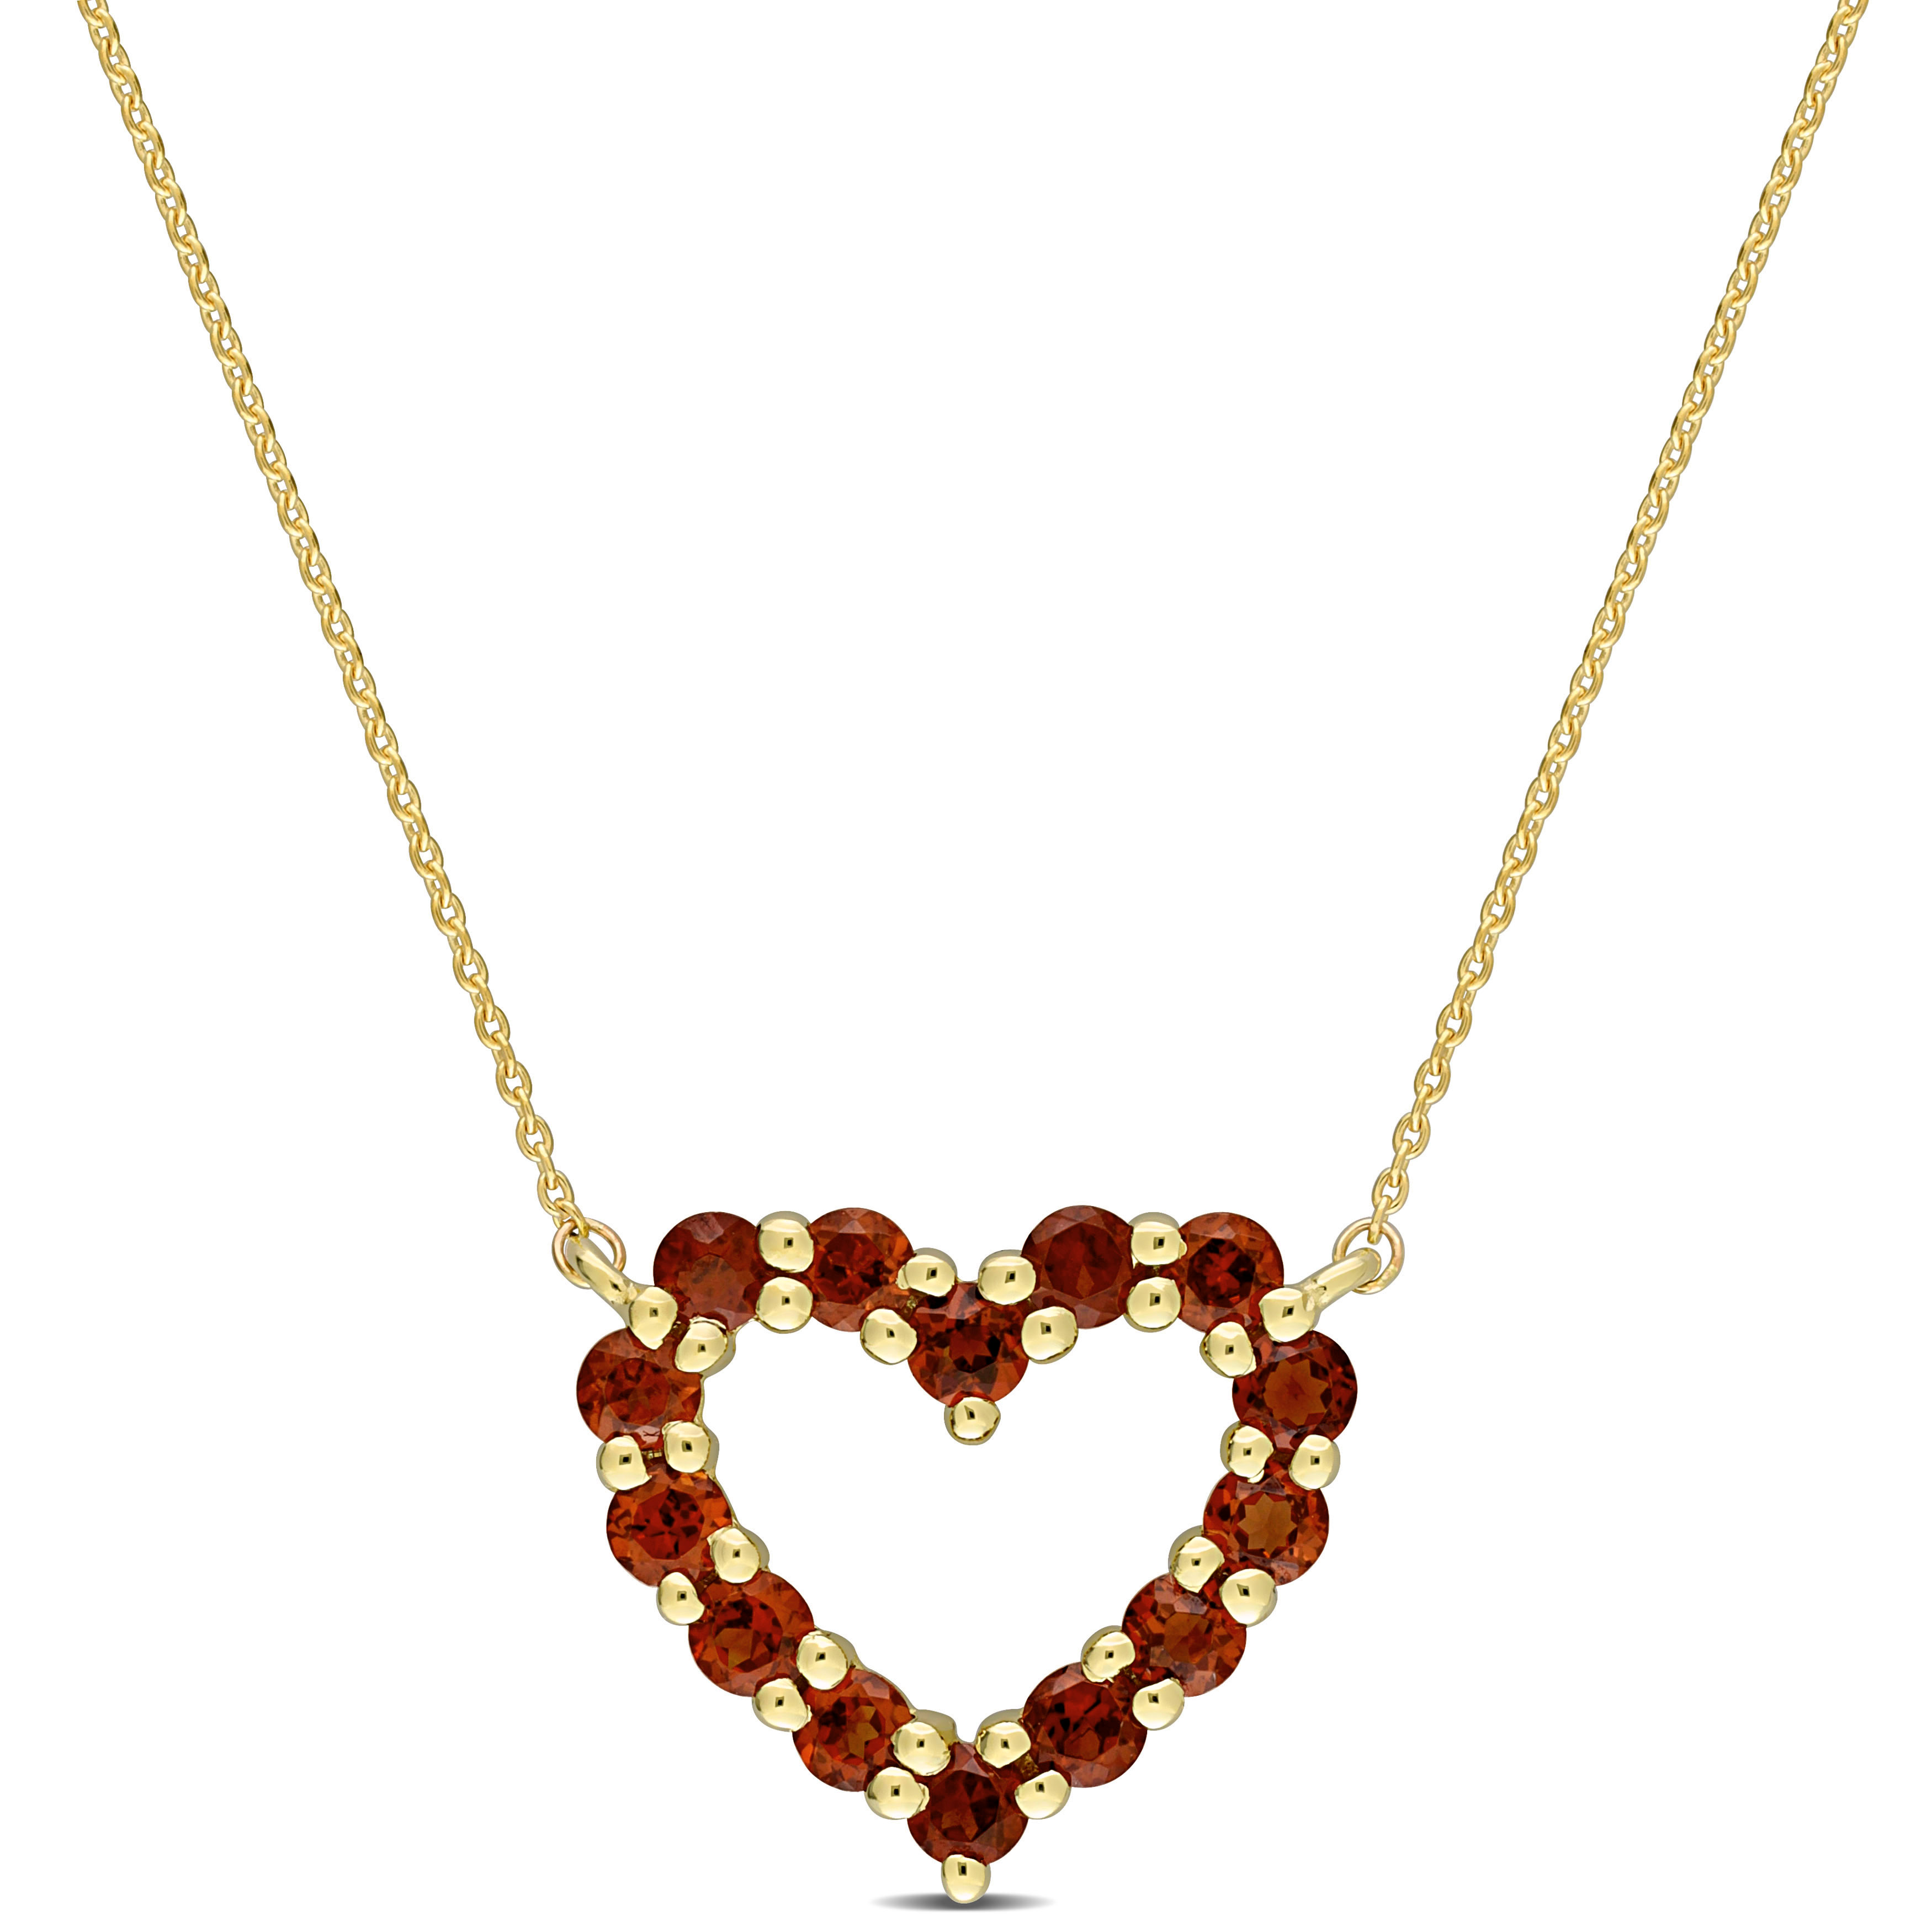 1 1/4 CT TGW Garnet Heart Pendant with Chain in 10k Yellow Gold - 17 in.